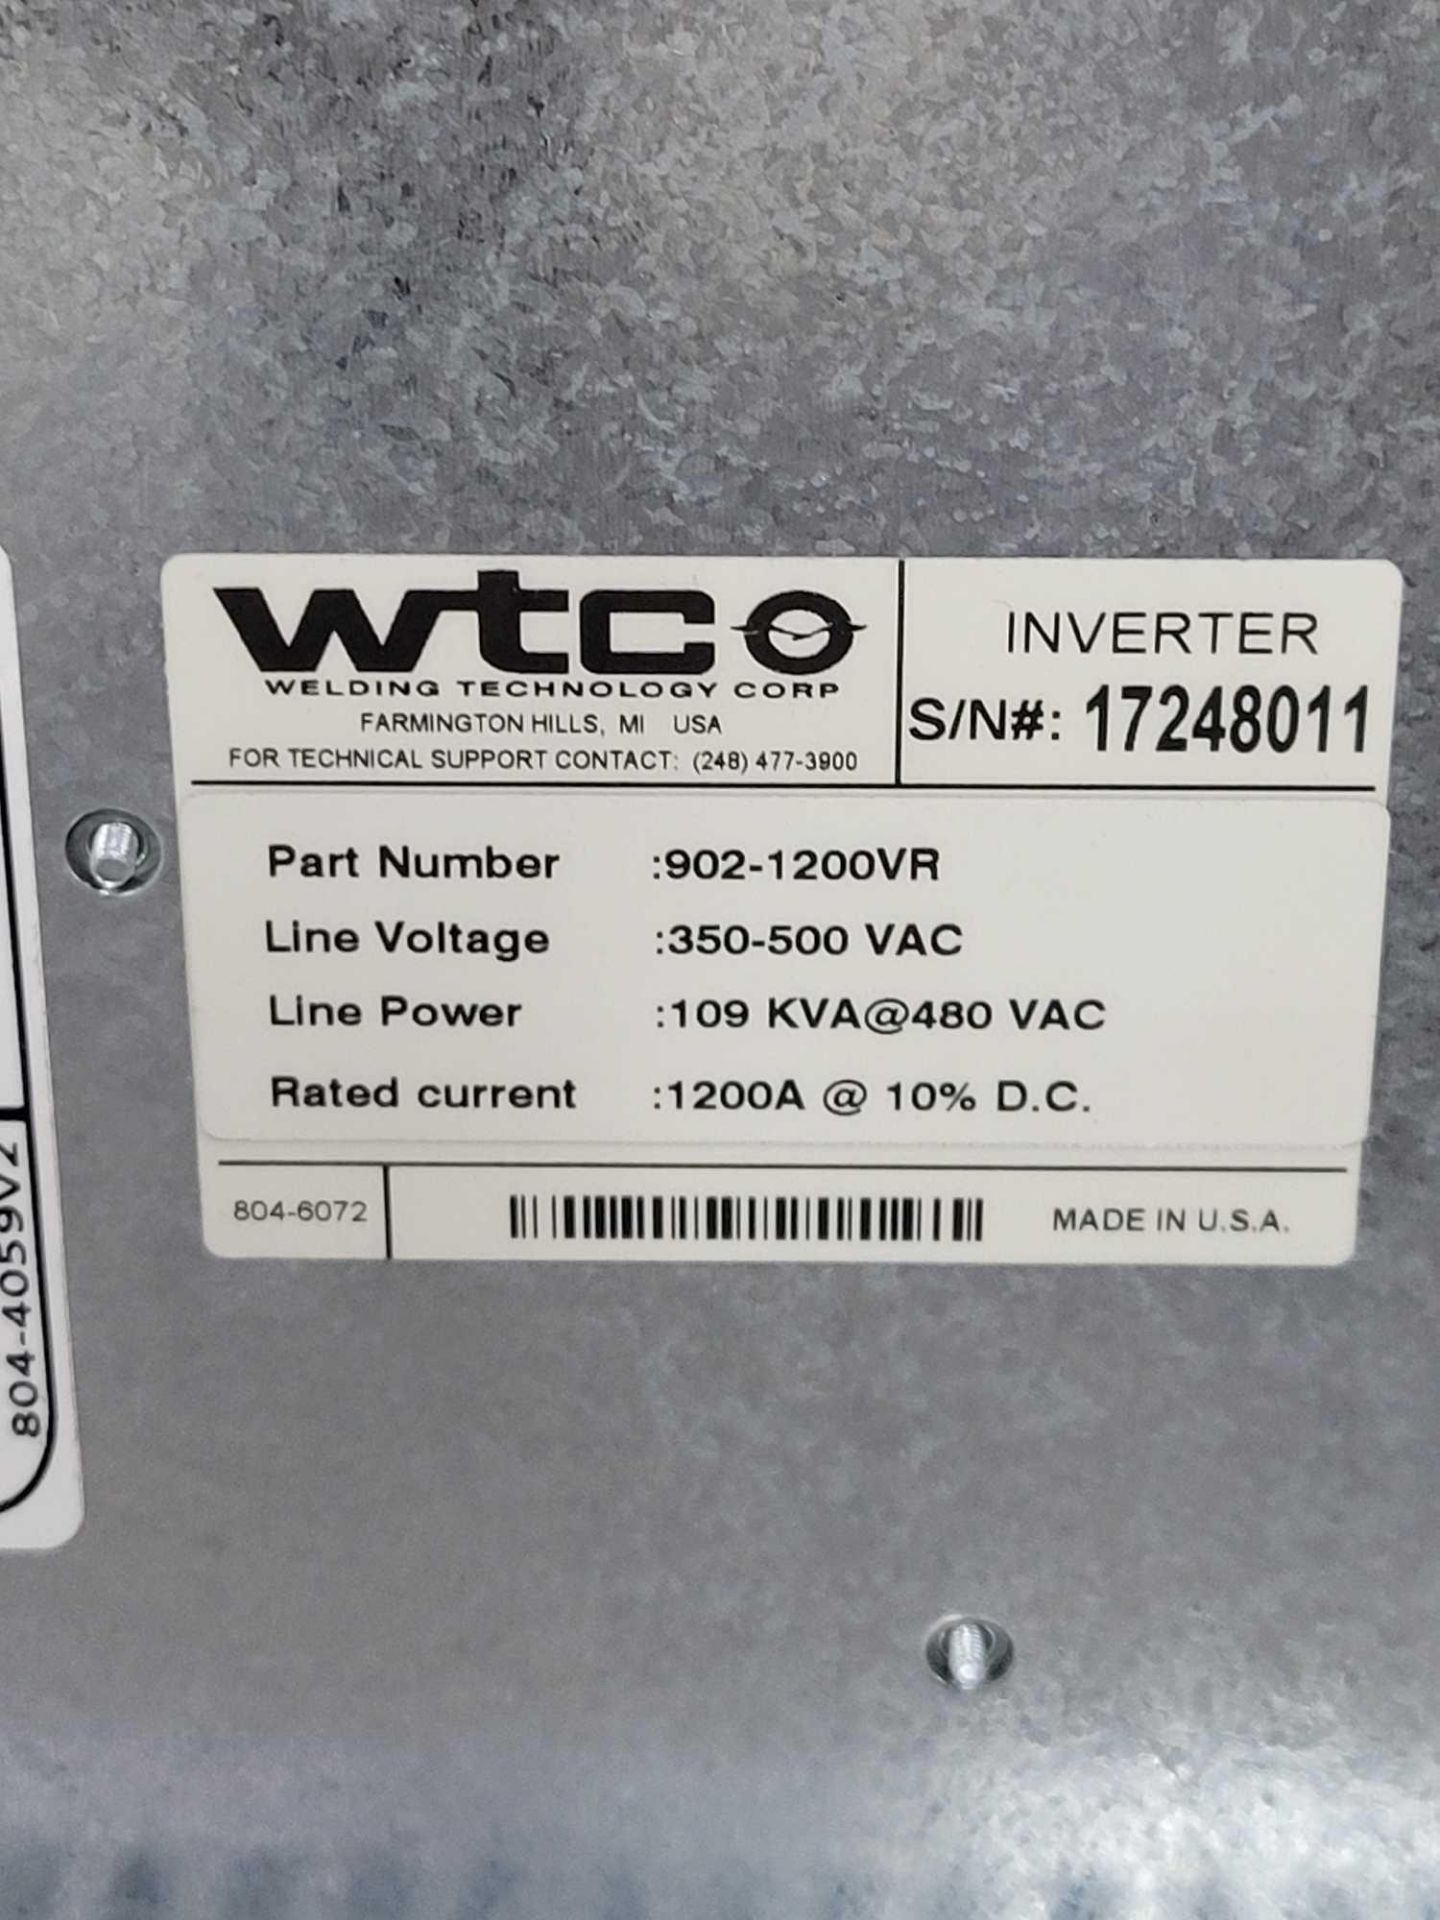 WTC 902-1200VR / Gen 6 MFDC Inverter  /  Lot Weight: 105 lbs - Image 2 of 4